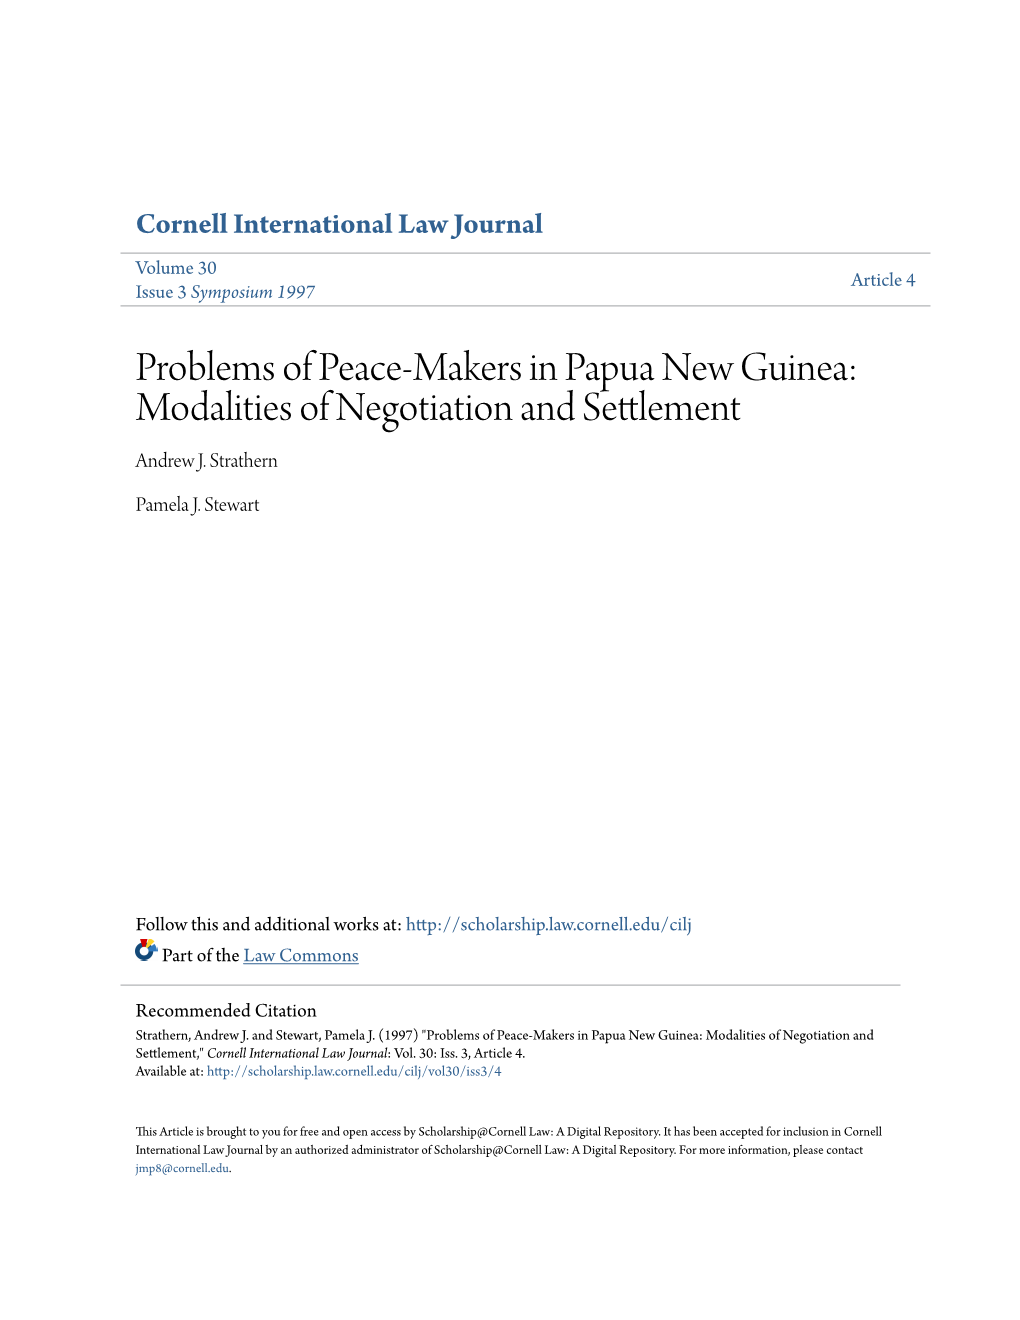 Problems of Peace-Makers in Papua New Guinea: Modalities of Negotiation and Settlement Andrew J